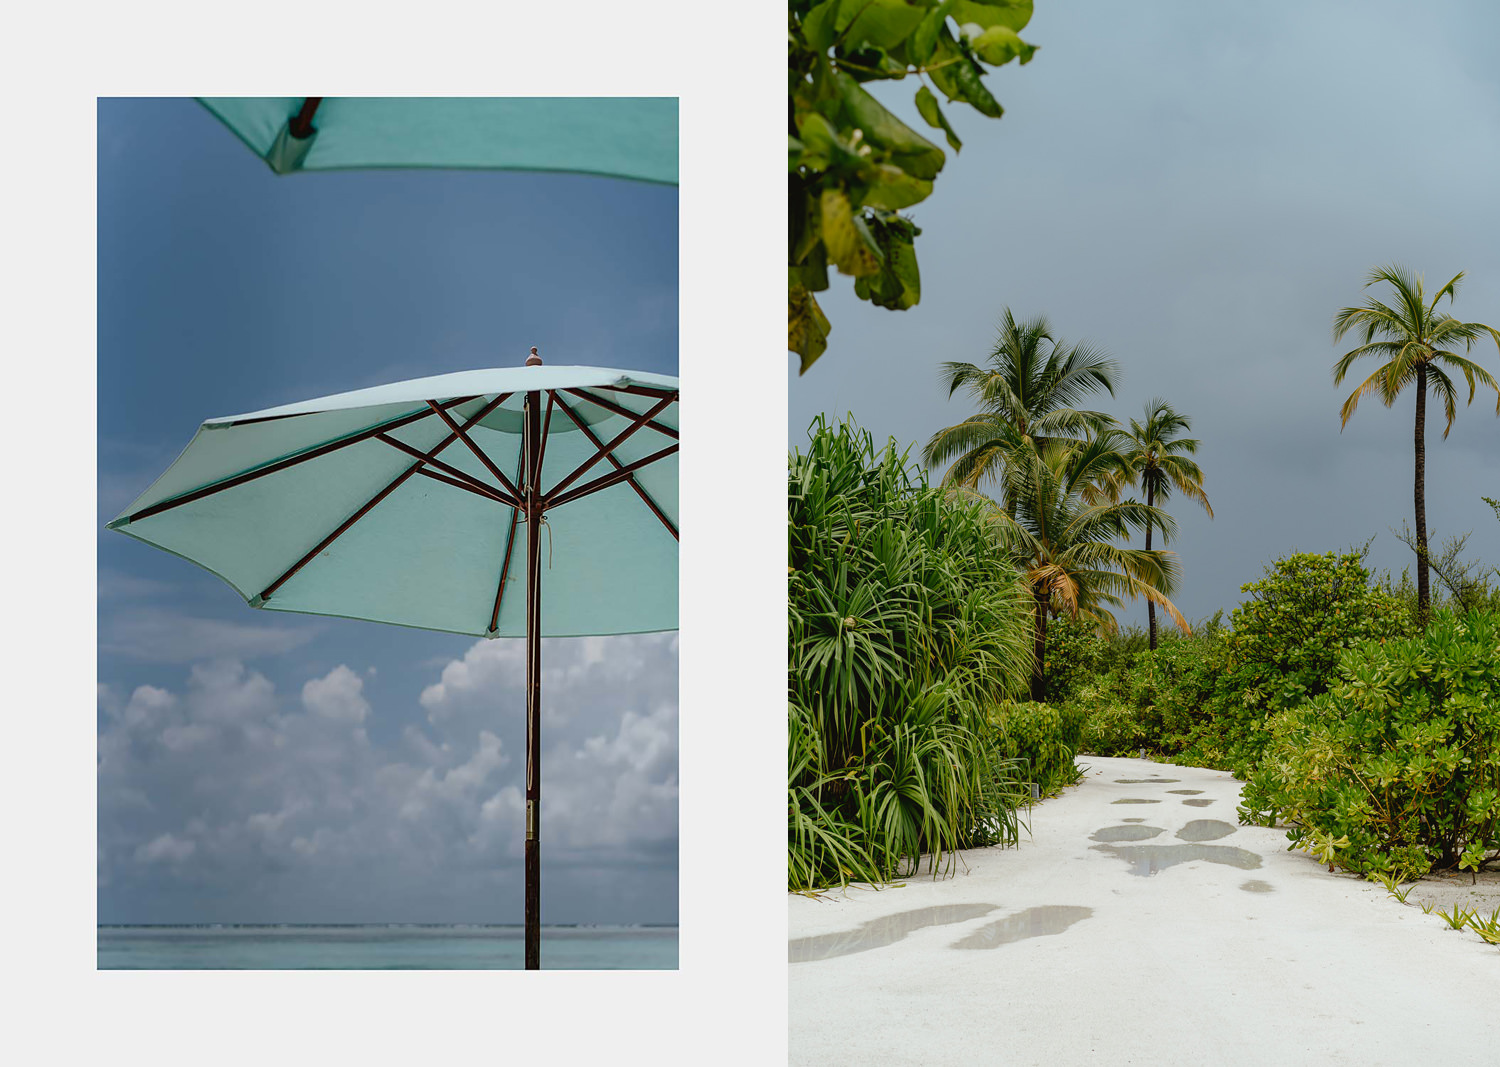 wedding photographer in maldives th anniversary trip what doing rainy day